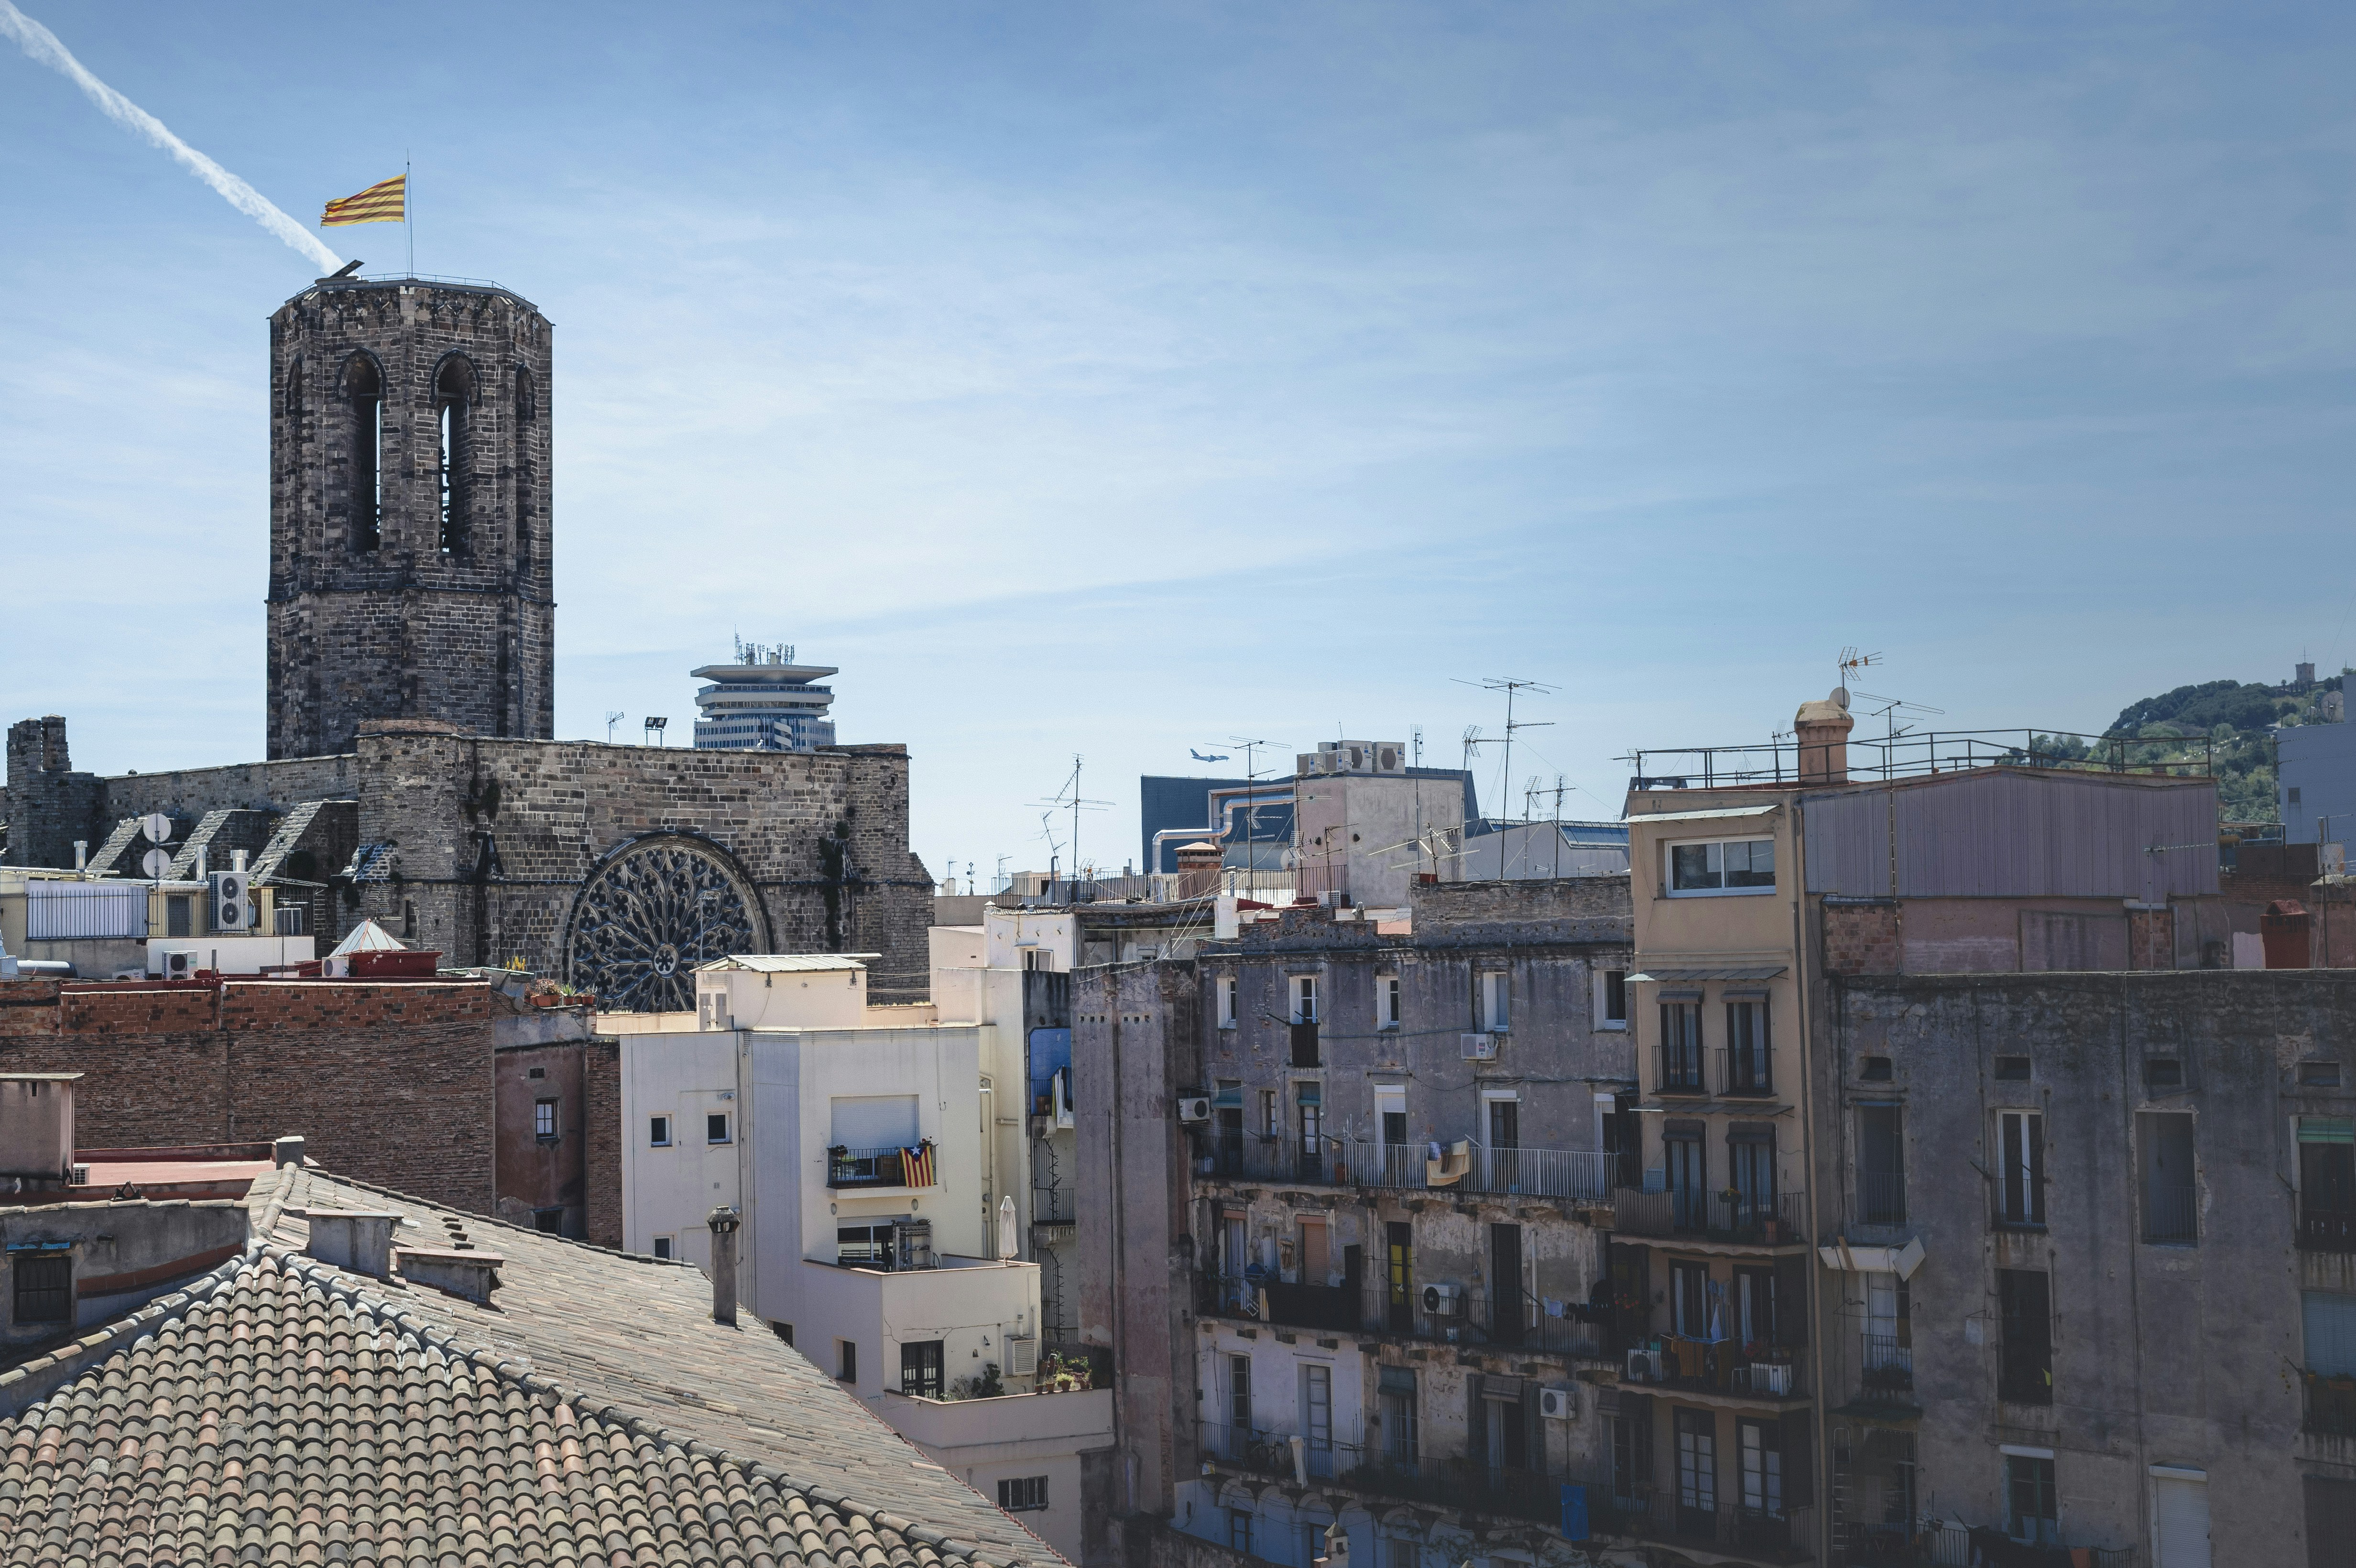 The rooftops of Barcelona are an incredible combination of all times and styles of architecture.